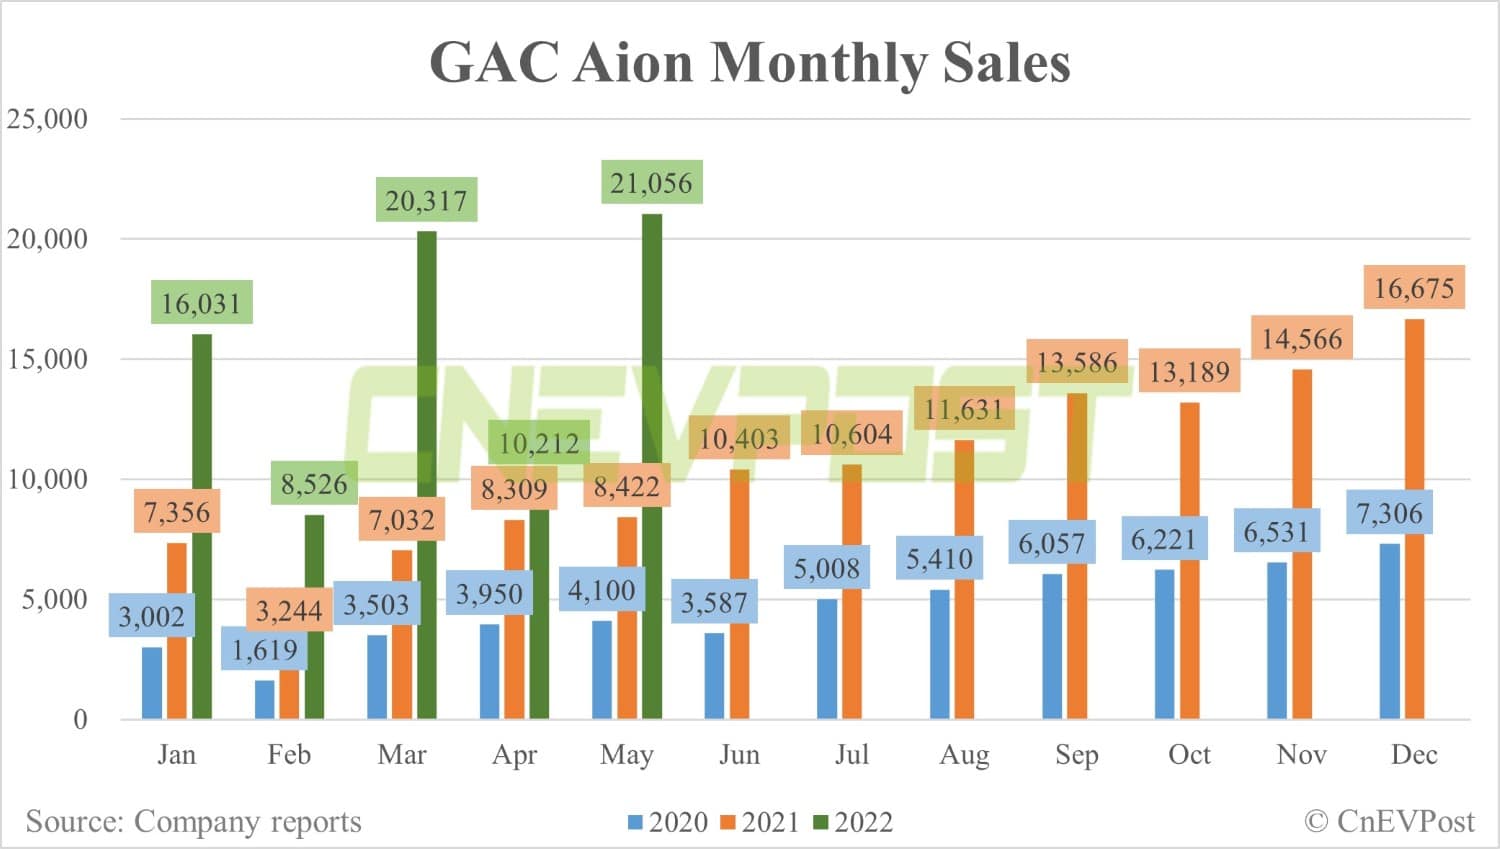 GAC Aion sells record 21,056 units in May, up 106% from April-CnEVPost